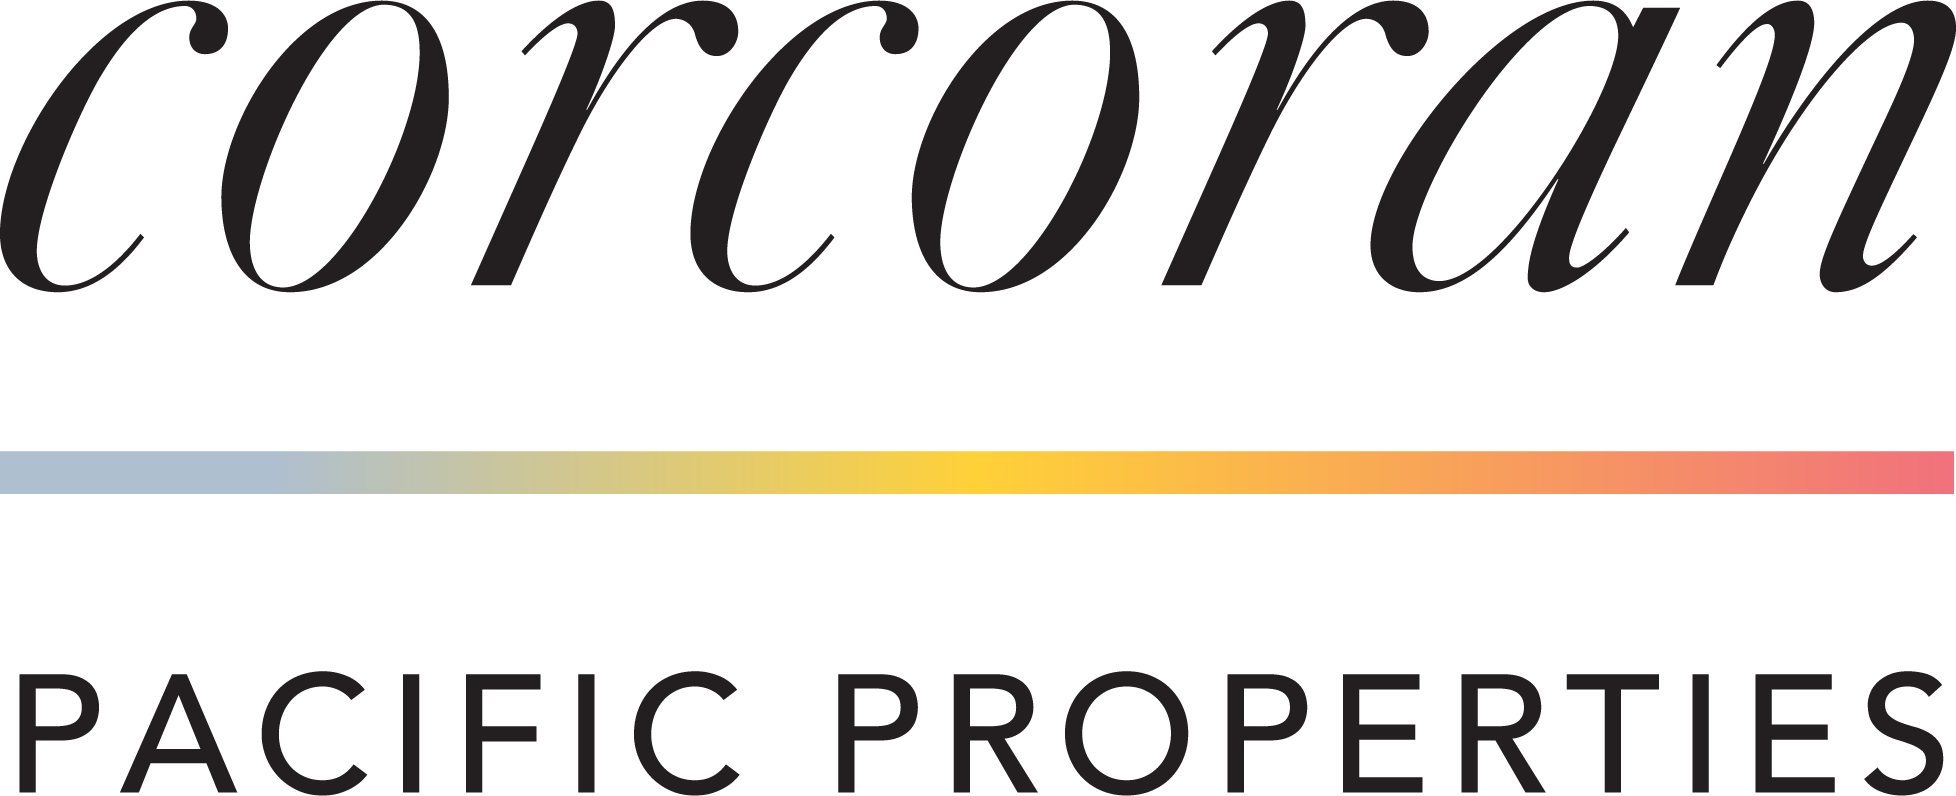 Building presented by Corcoran Pacific Properties